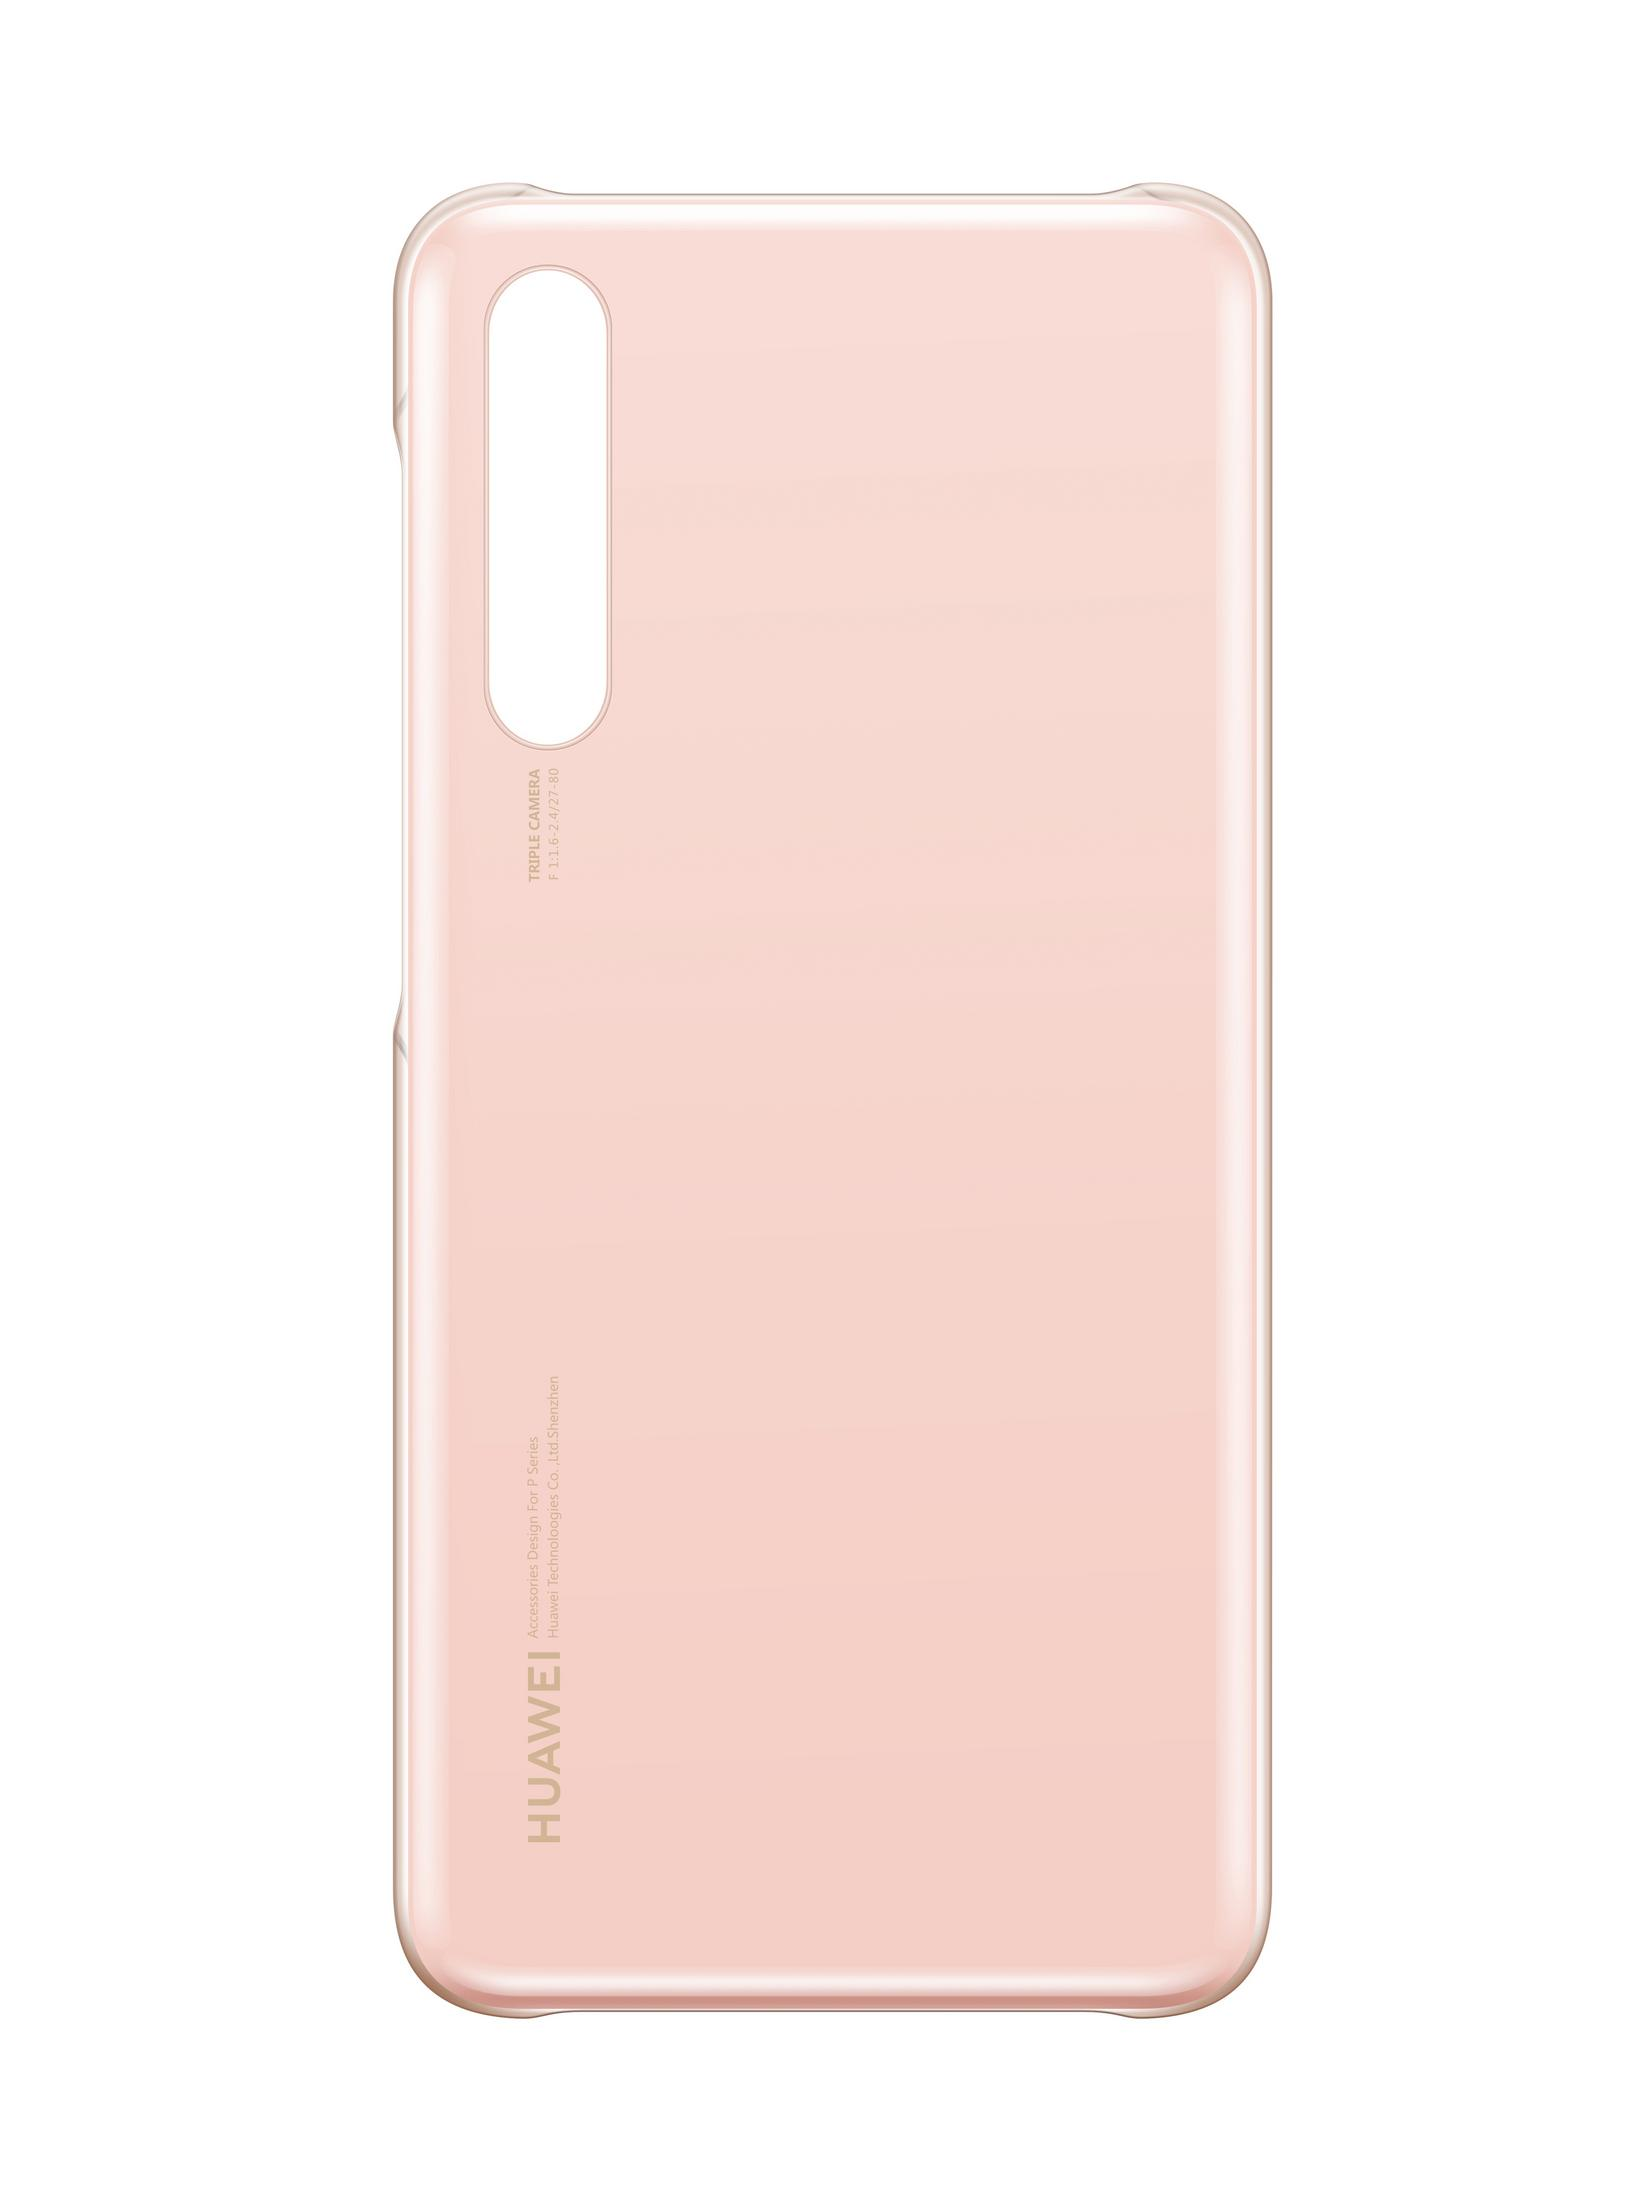 Pink Backcover, P20 51992376 COLOR Pro, Huawei, P20 HUAWEI CASE PINK, PRO